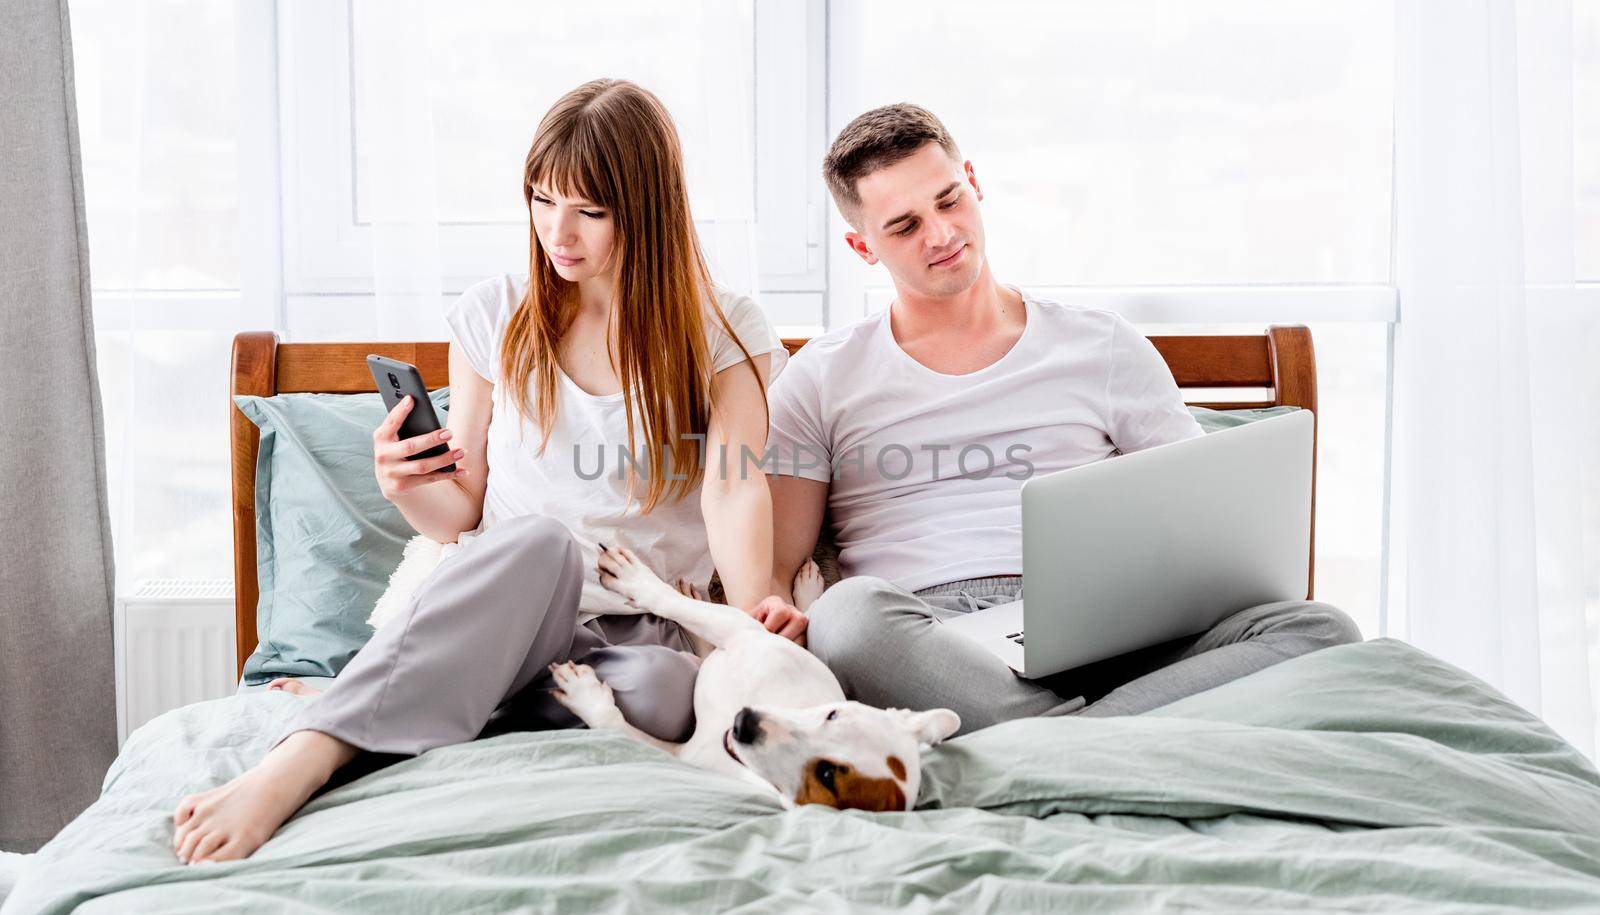 Young couple in the bed with gadgets and cute dog. Beautiful woman and man looking at laptop and smartphone and their doggy lying close to them. Family morning with pet and technologies